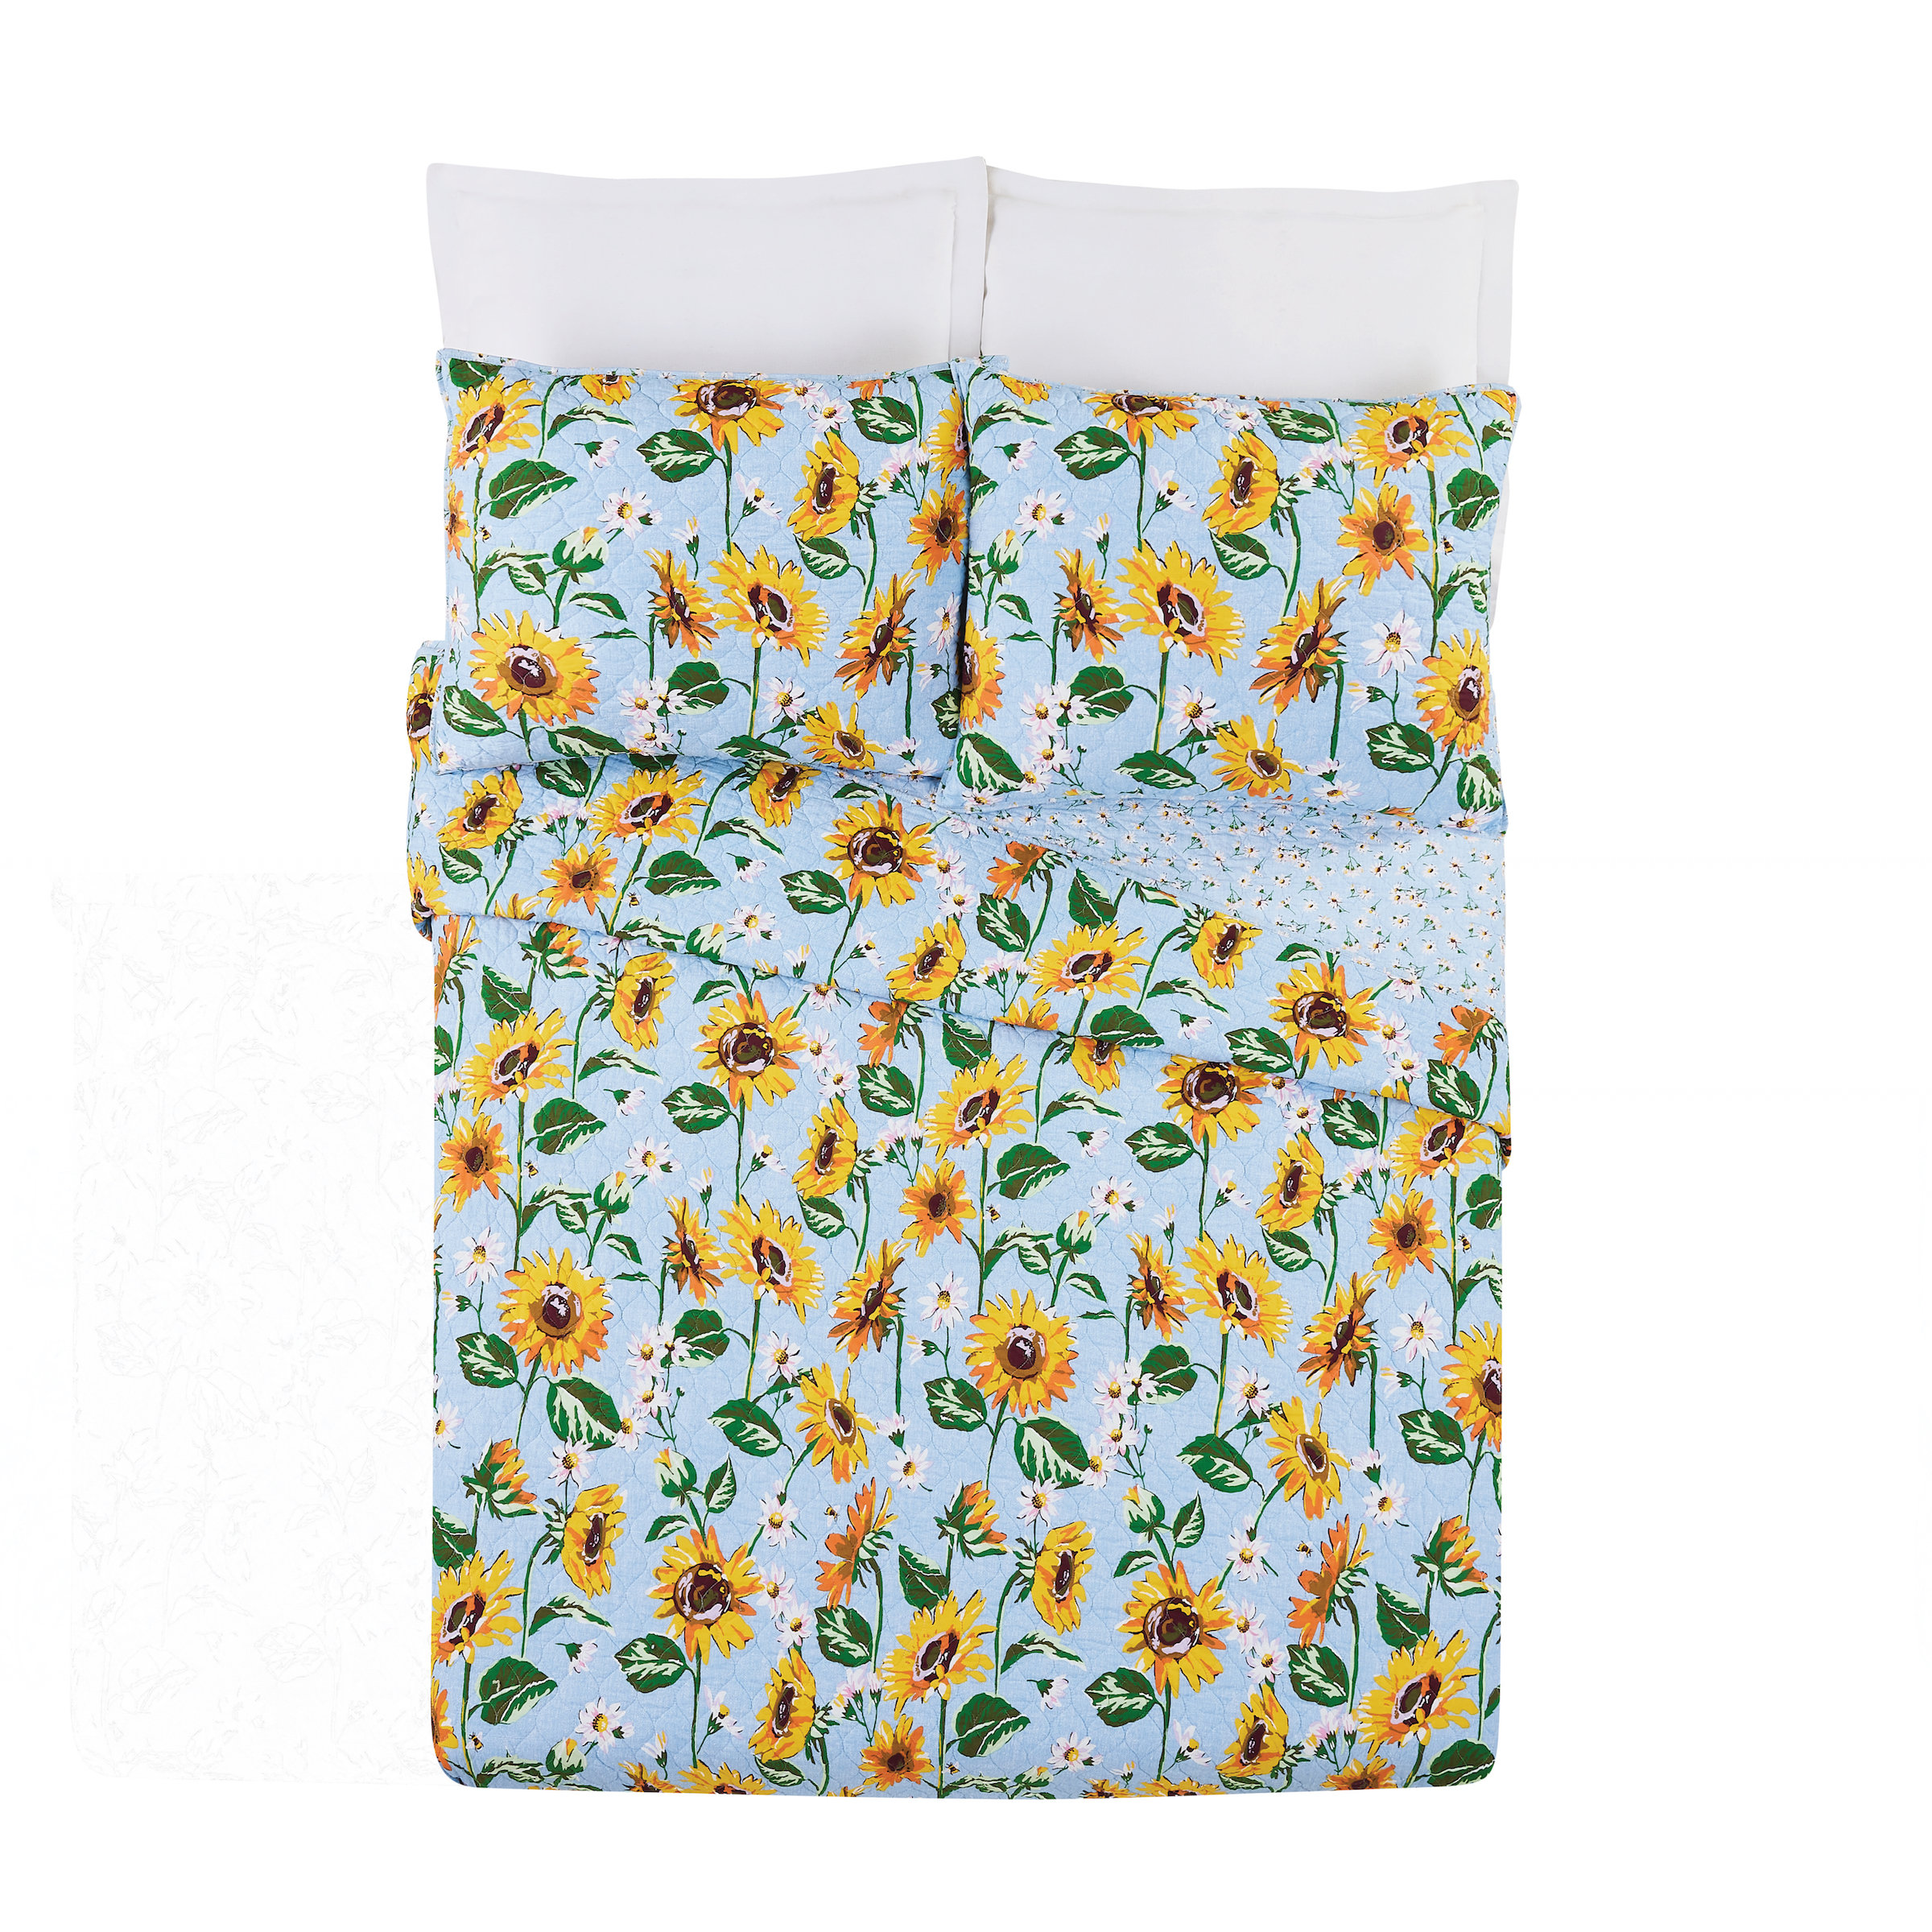 Sunny Yellow Tossed Sunflowers Cotton Woven Apparel Fabric